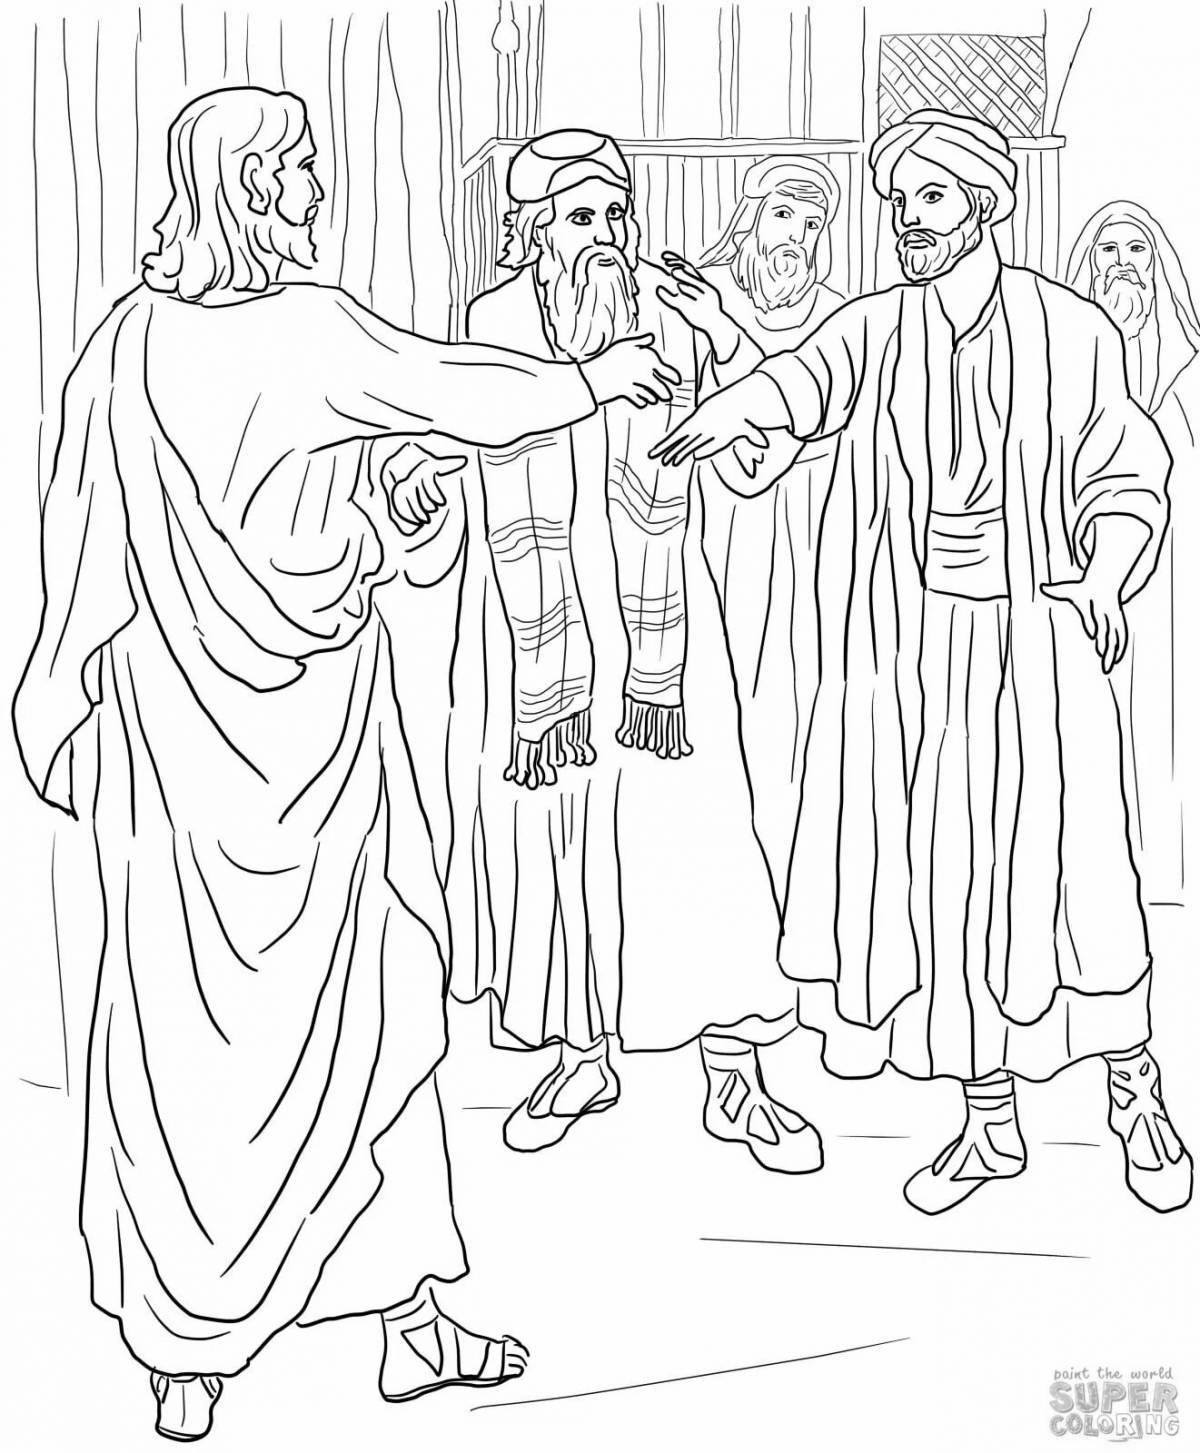 Coloring book publican and Pharisee, mad with colors